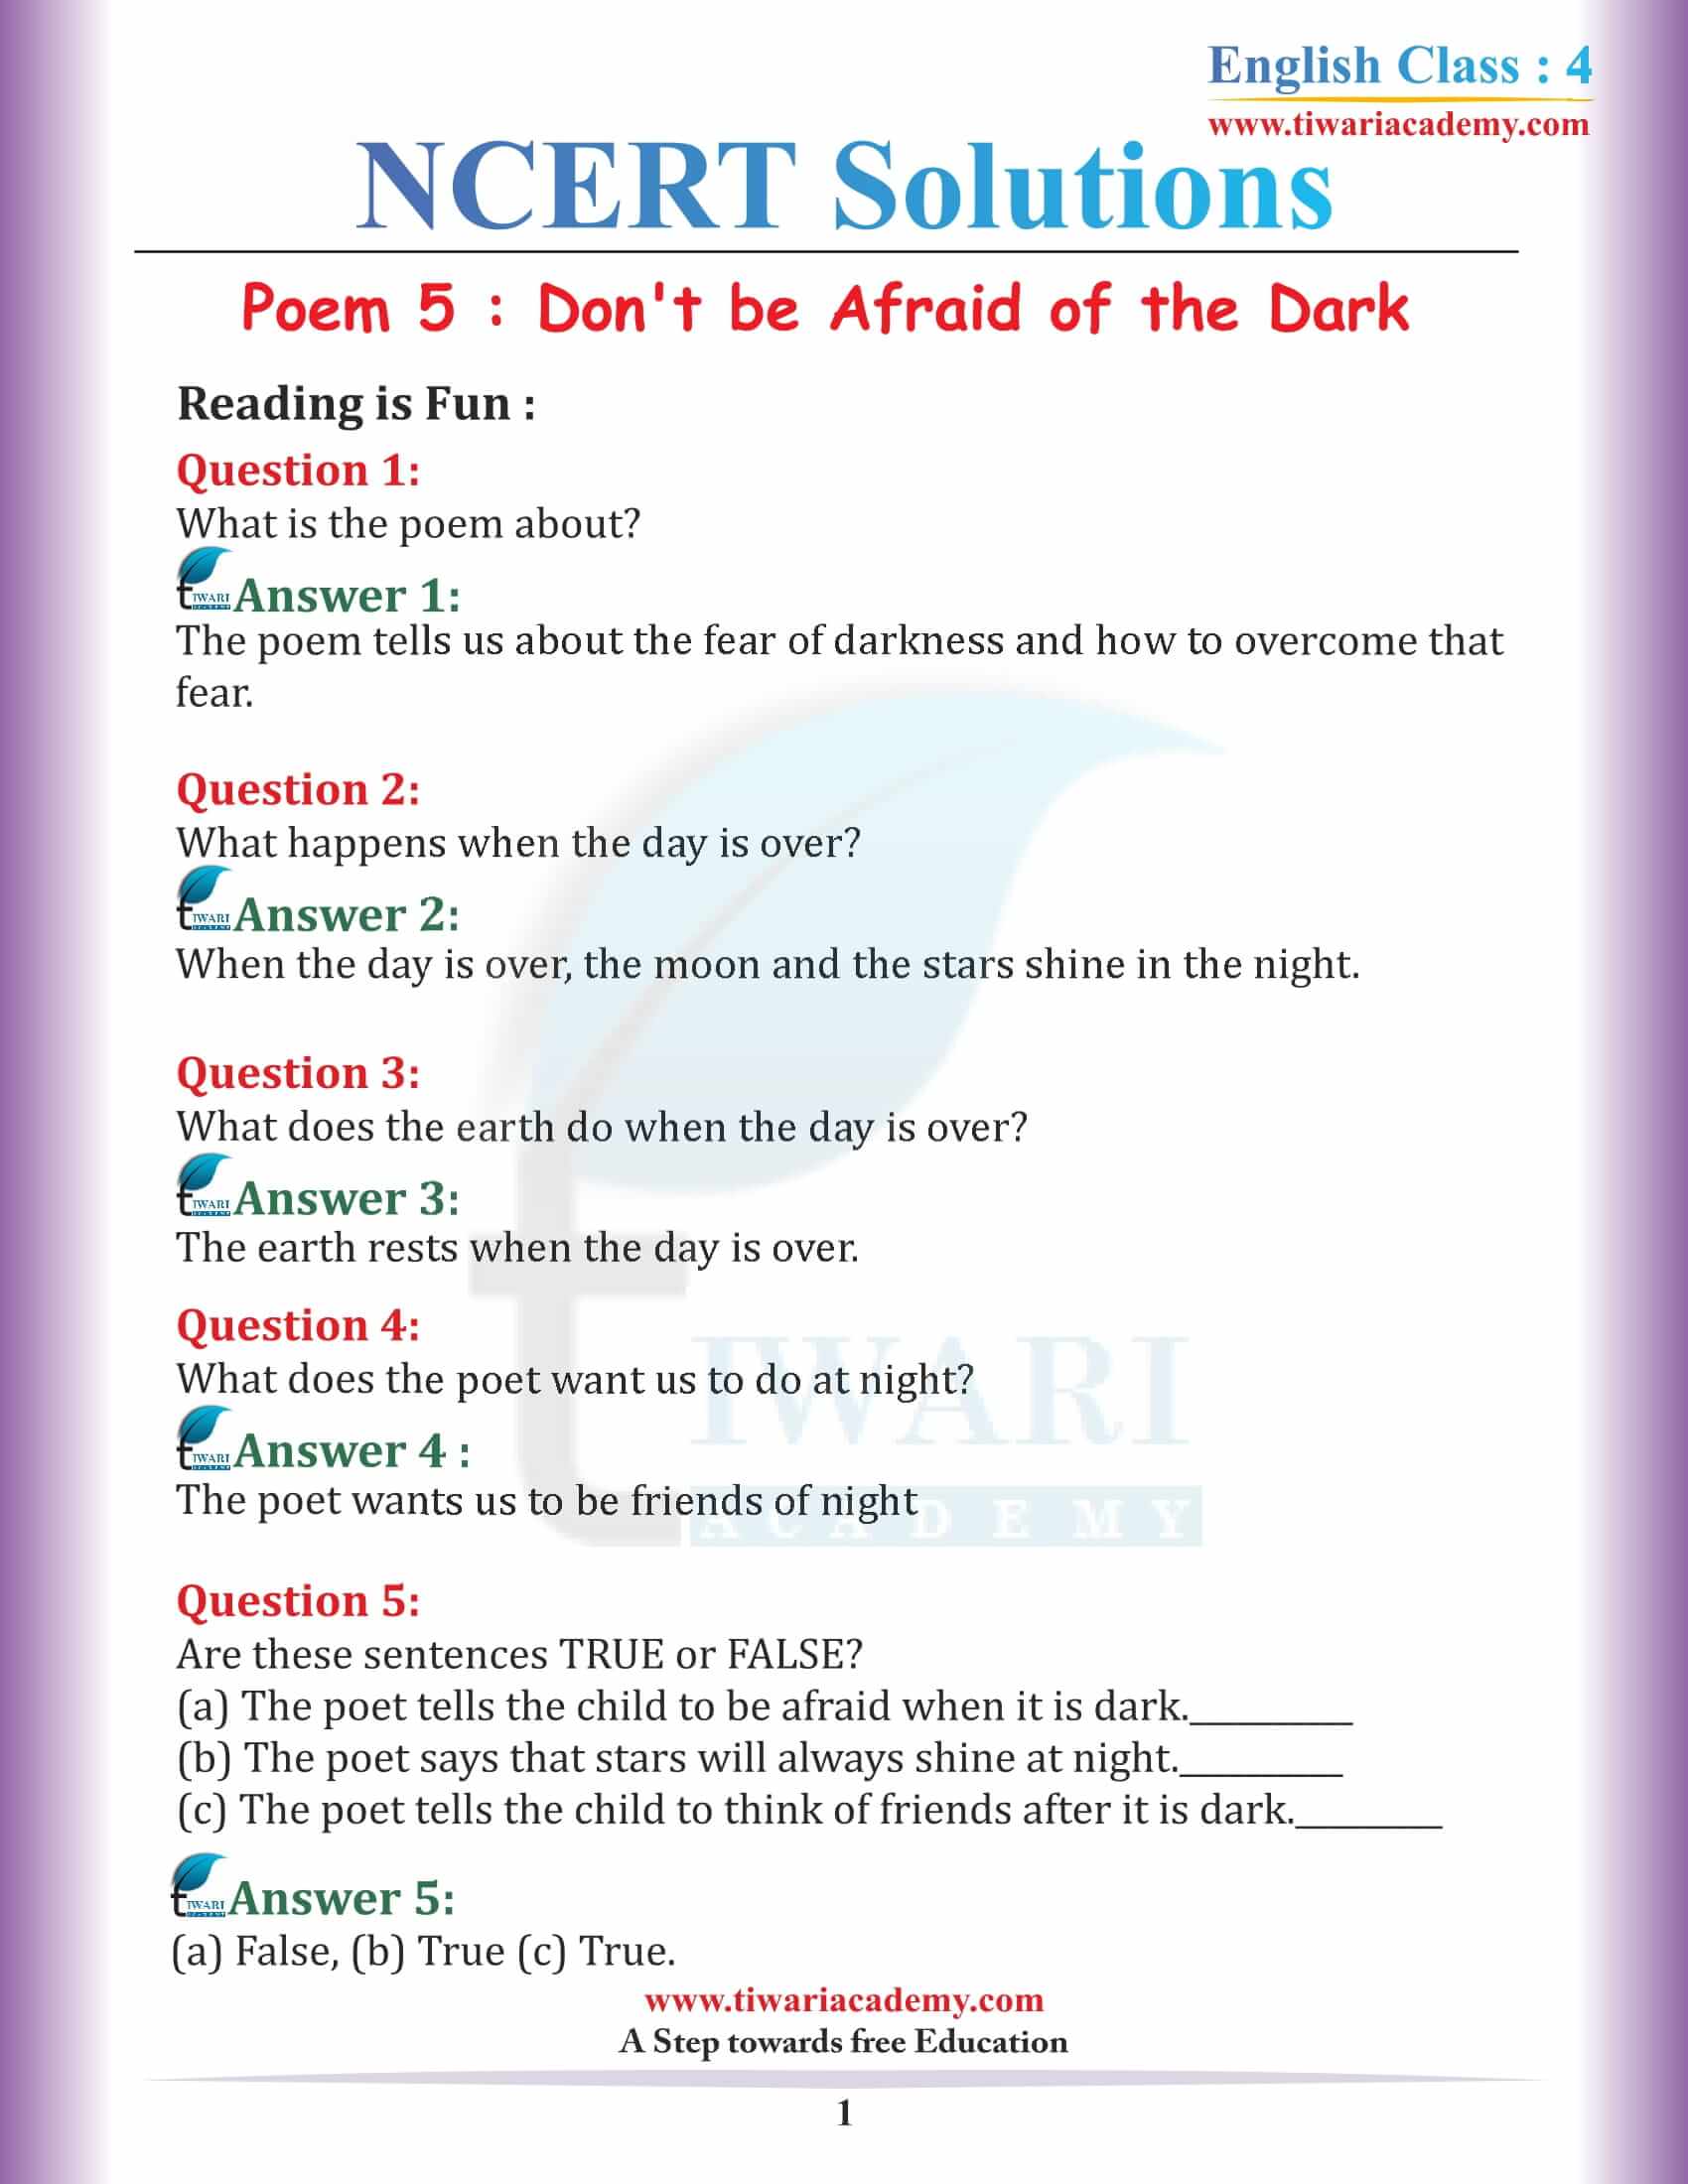 NCERT Solutions for Class 4 English Unit 5 Chapter 1 Don’t be Afraid of the Dark